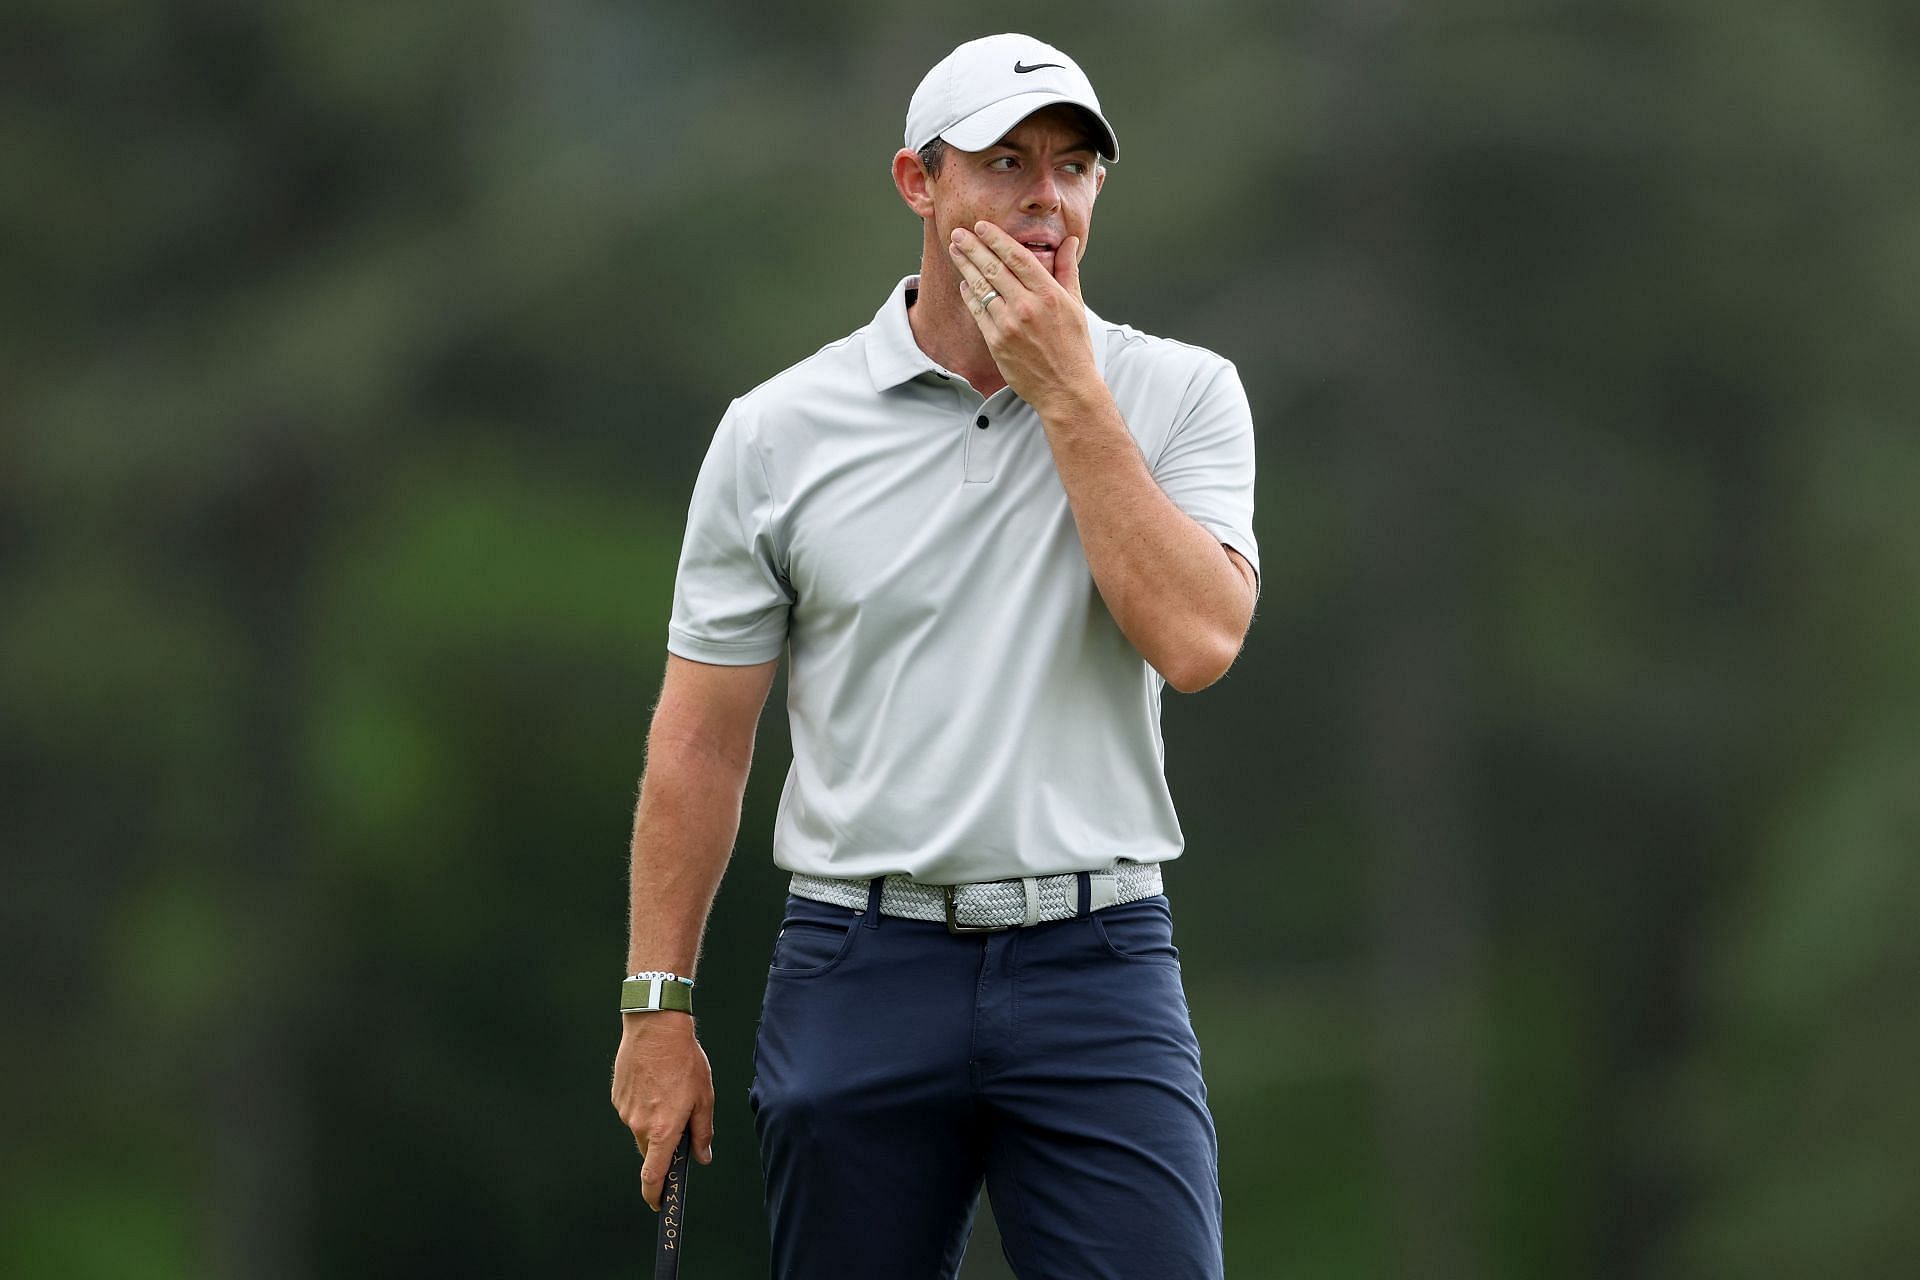 Rory McIlroy disappointed after shock exit from the Masters